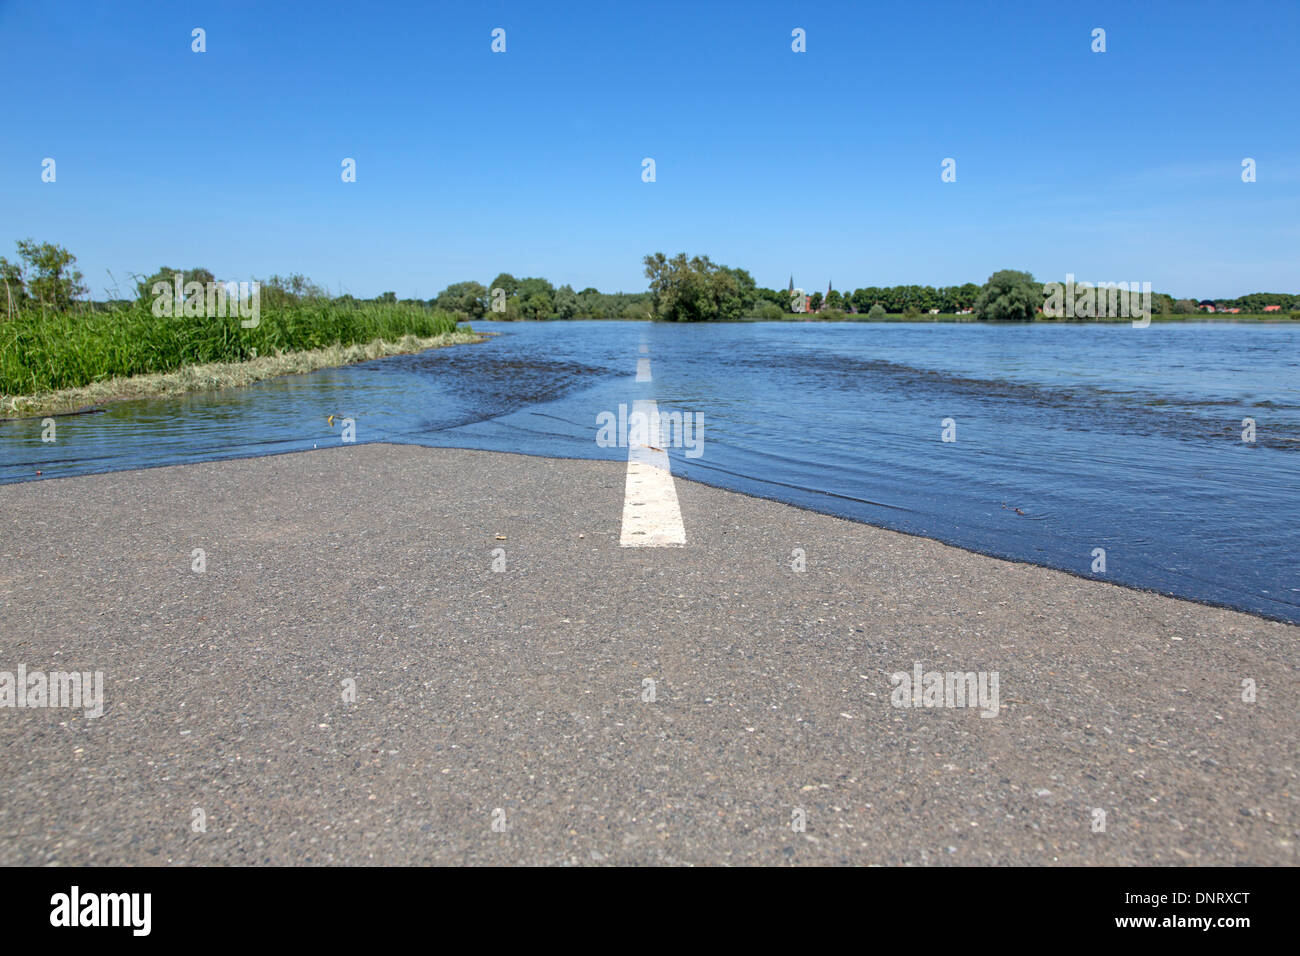 Road with high water, 2013, Dömitz, Germany, Europe Stock Photo